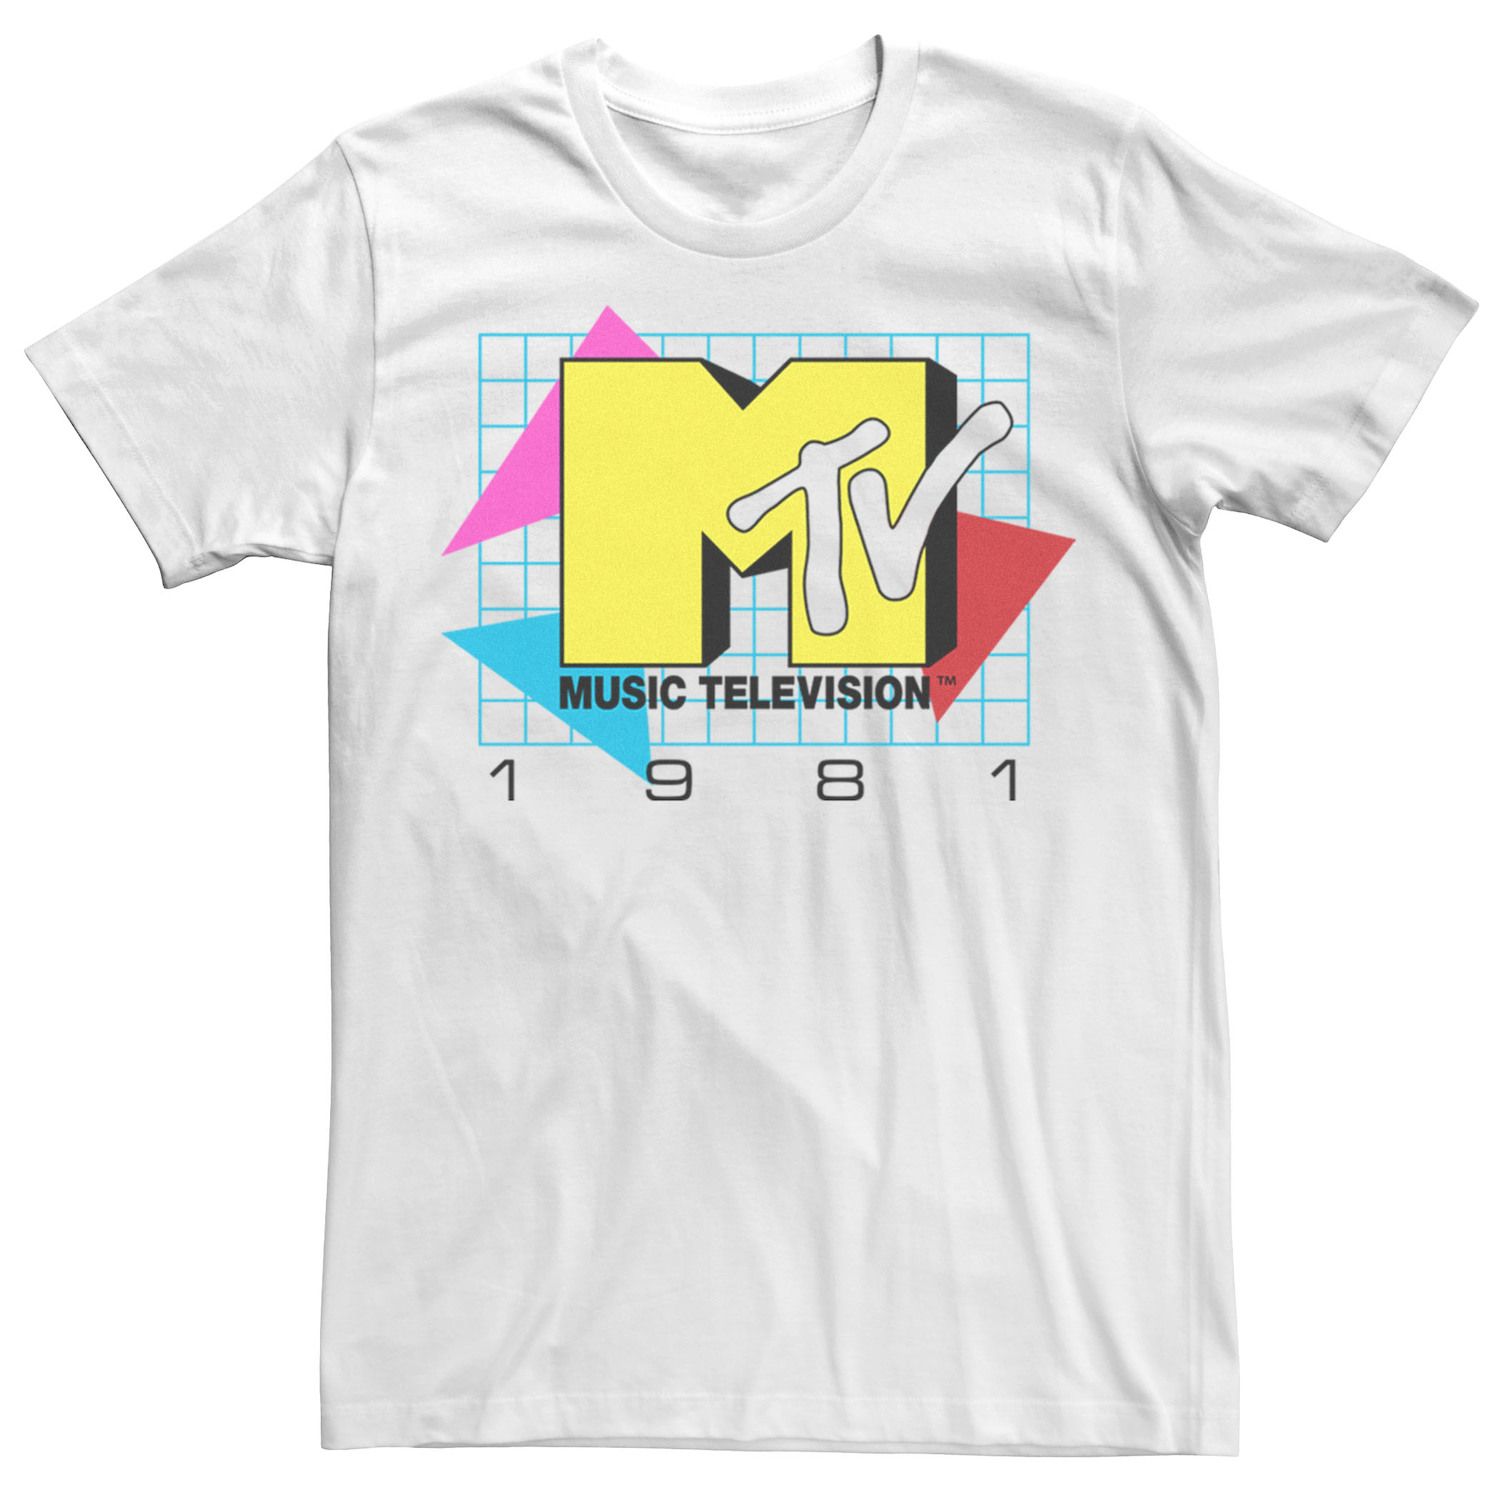 Image for Licensed Character Big & Tall MTV Music Television 1981 Logo Tee at Kohl's.